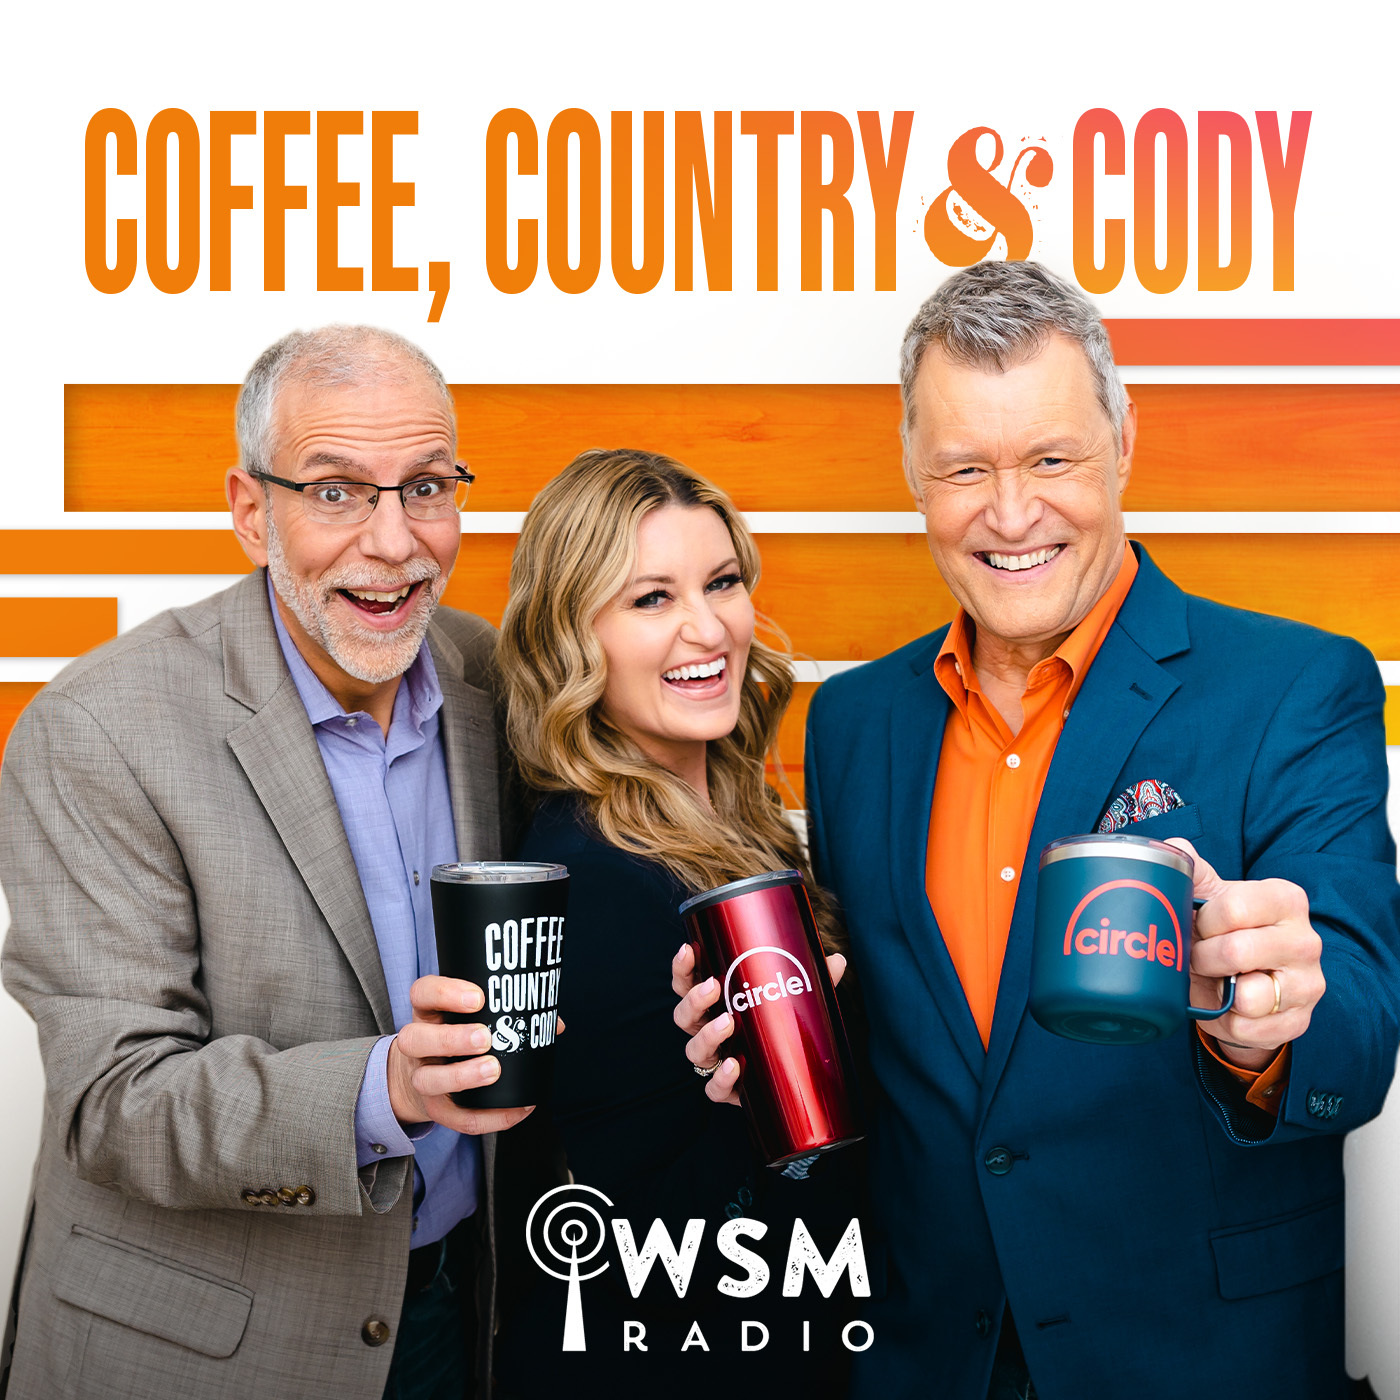 Chuck Mead on Coffee, Country & Cody